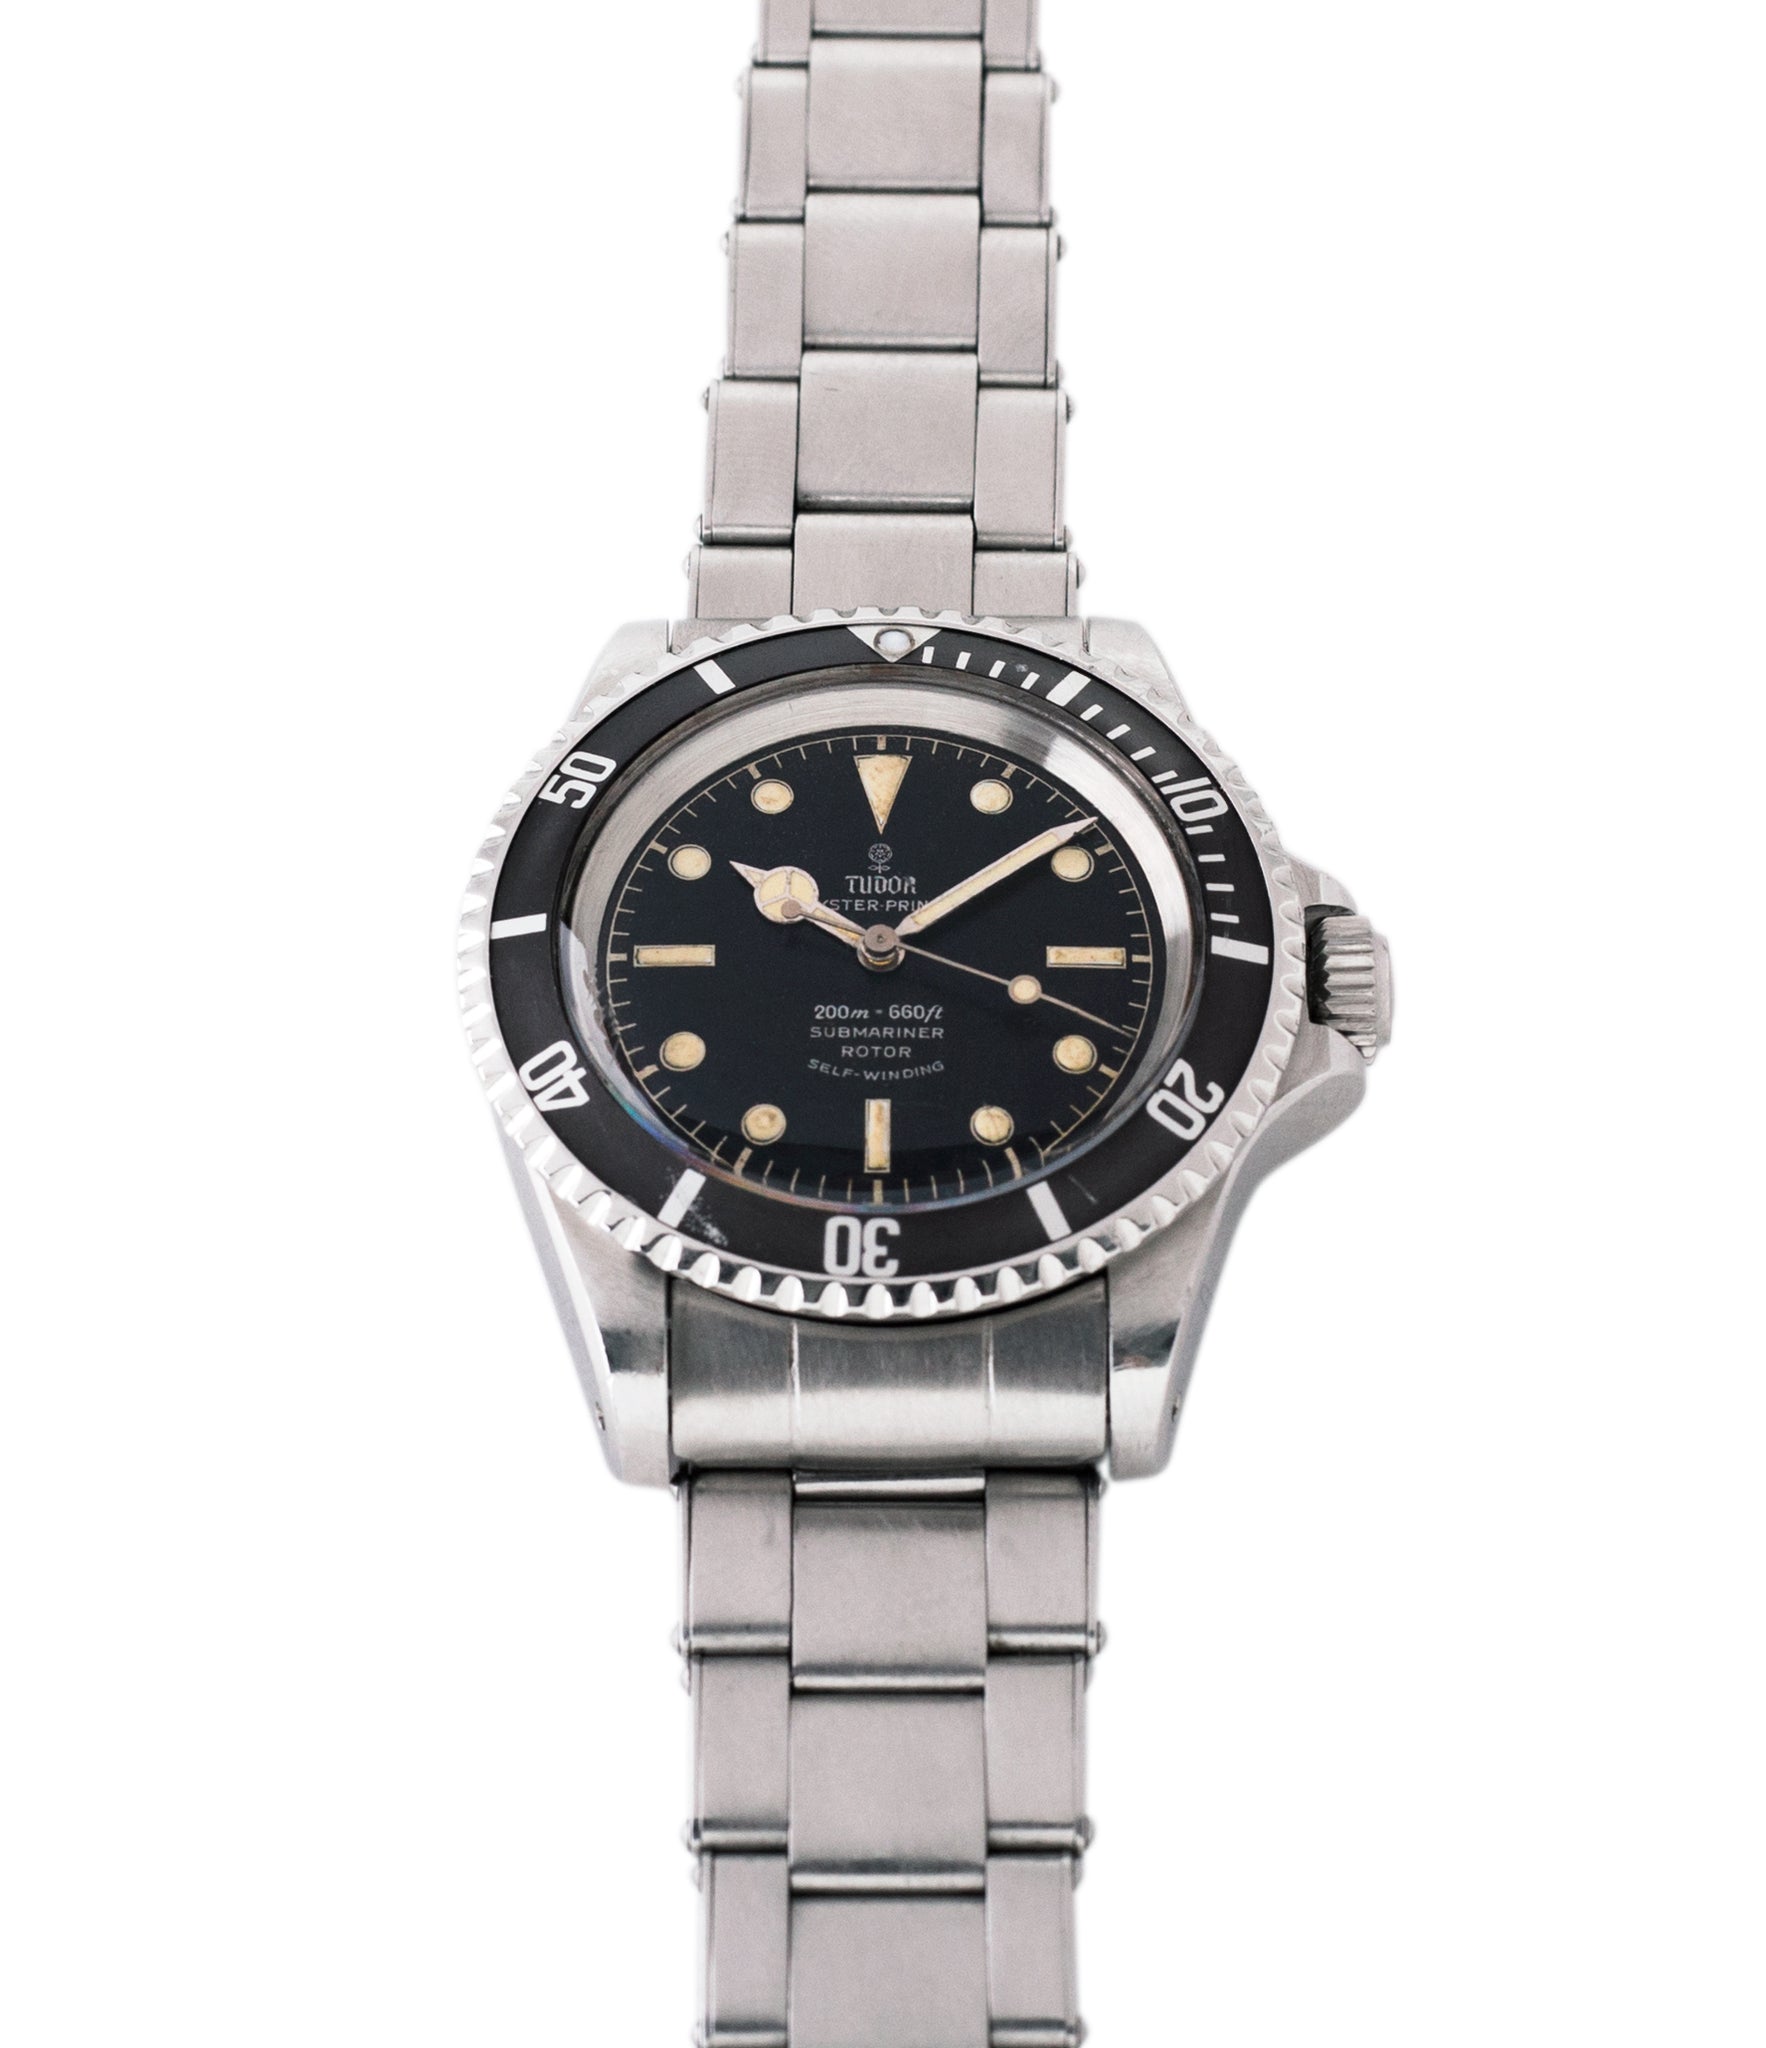 Submariner 7928 Tudor Oyster Prince Cal. 390 automatic sport watch at A Collected Man London online vintage watch specialist UK